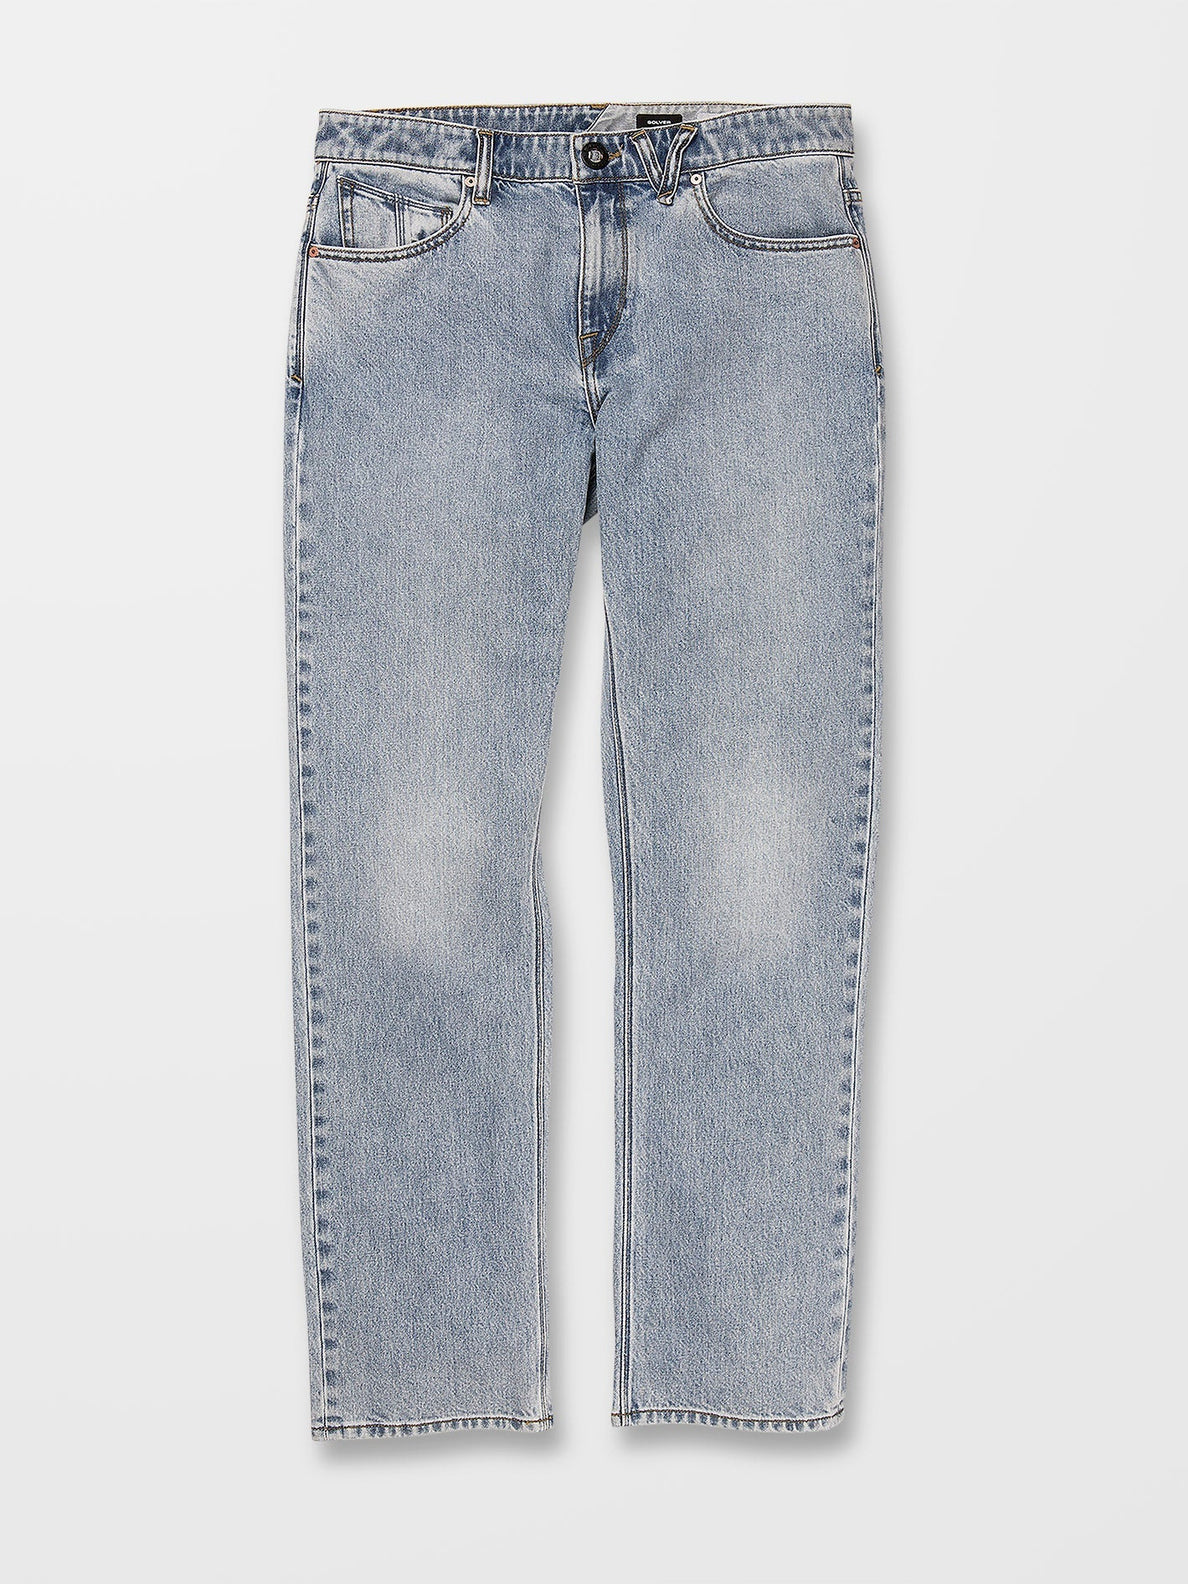 Solver Jeans - HEAVY WORN FADED (A1912303_HWR) [3]